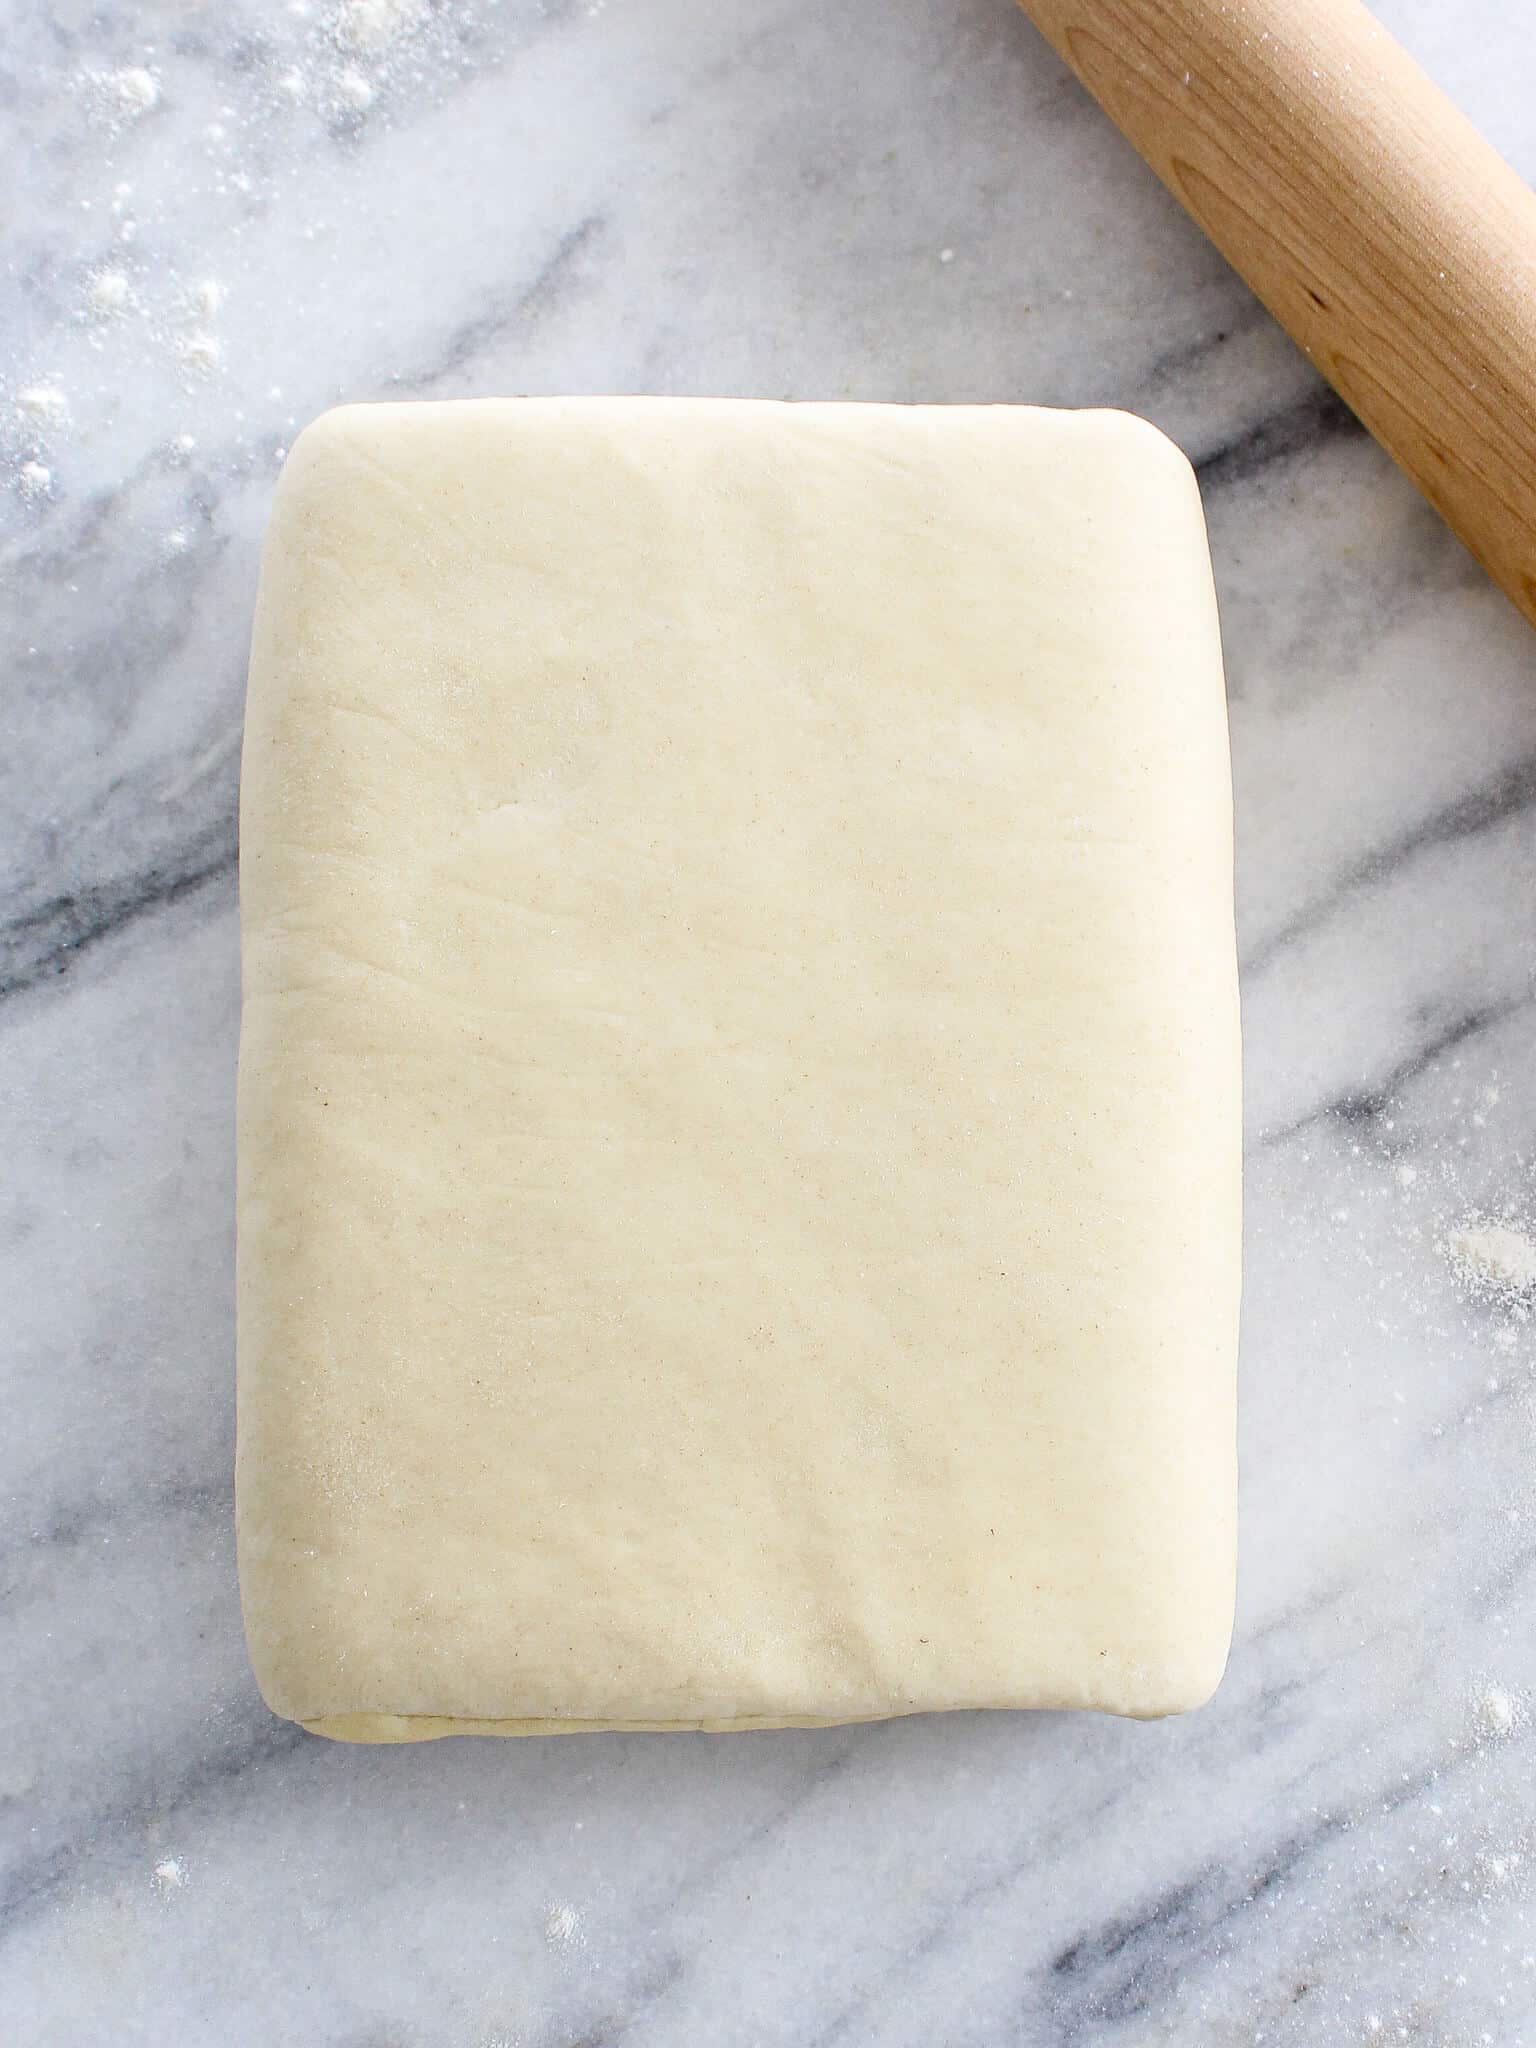 Classic Puff Pastry with wooden rolling pin